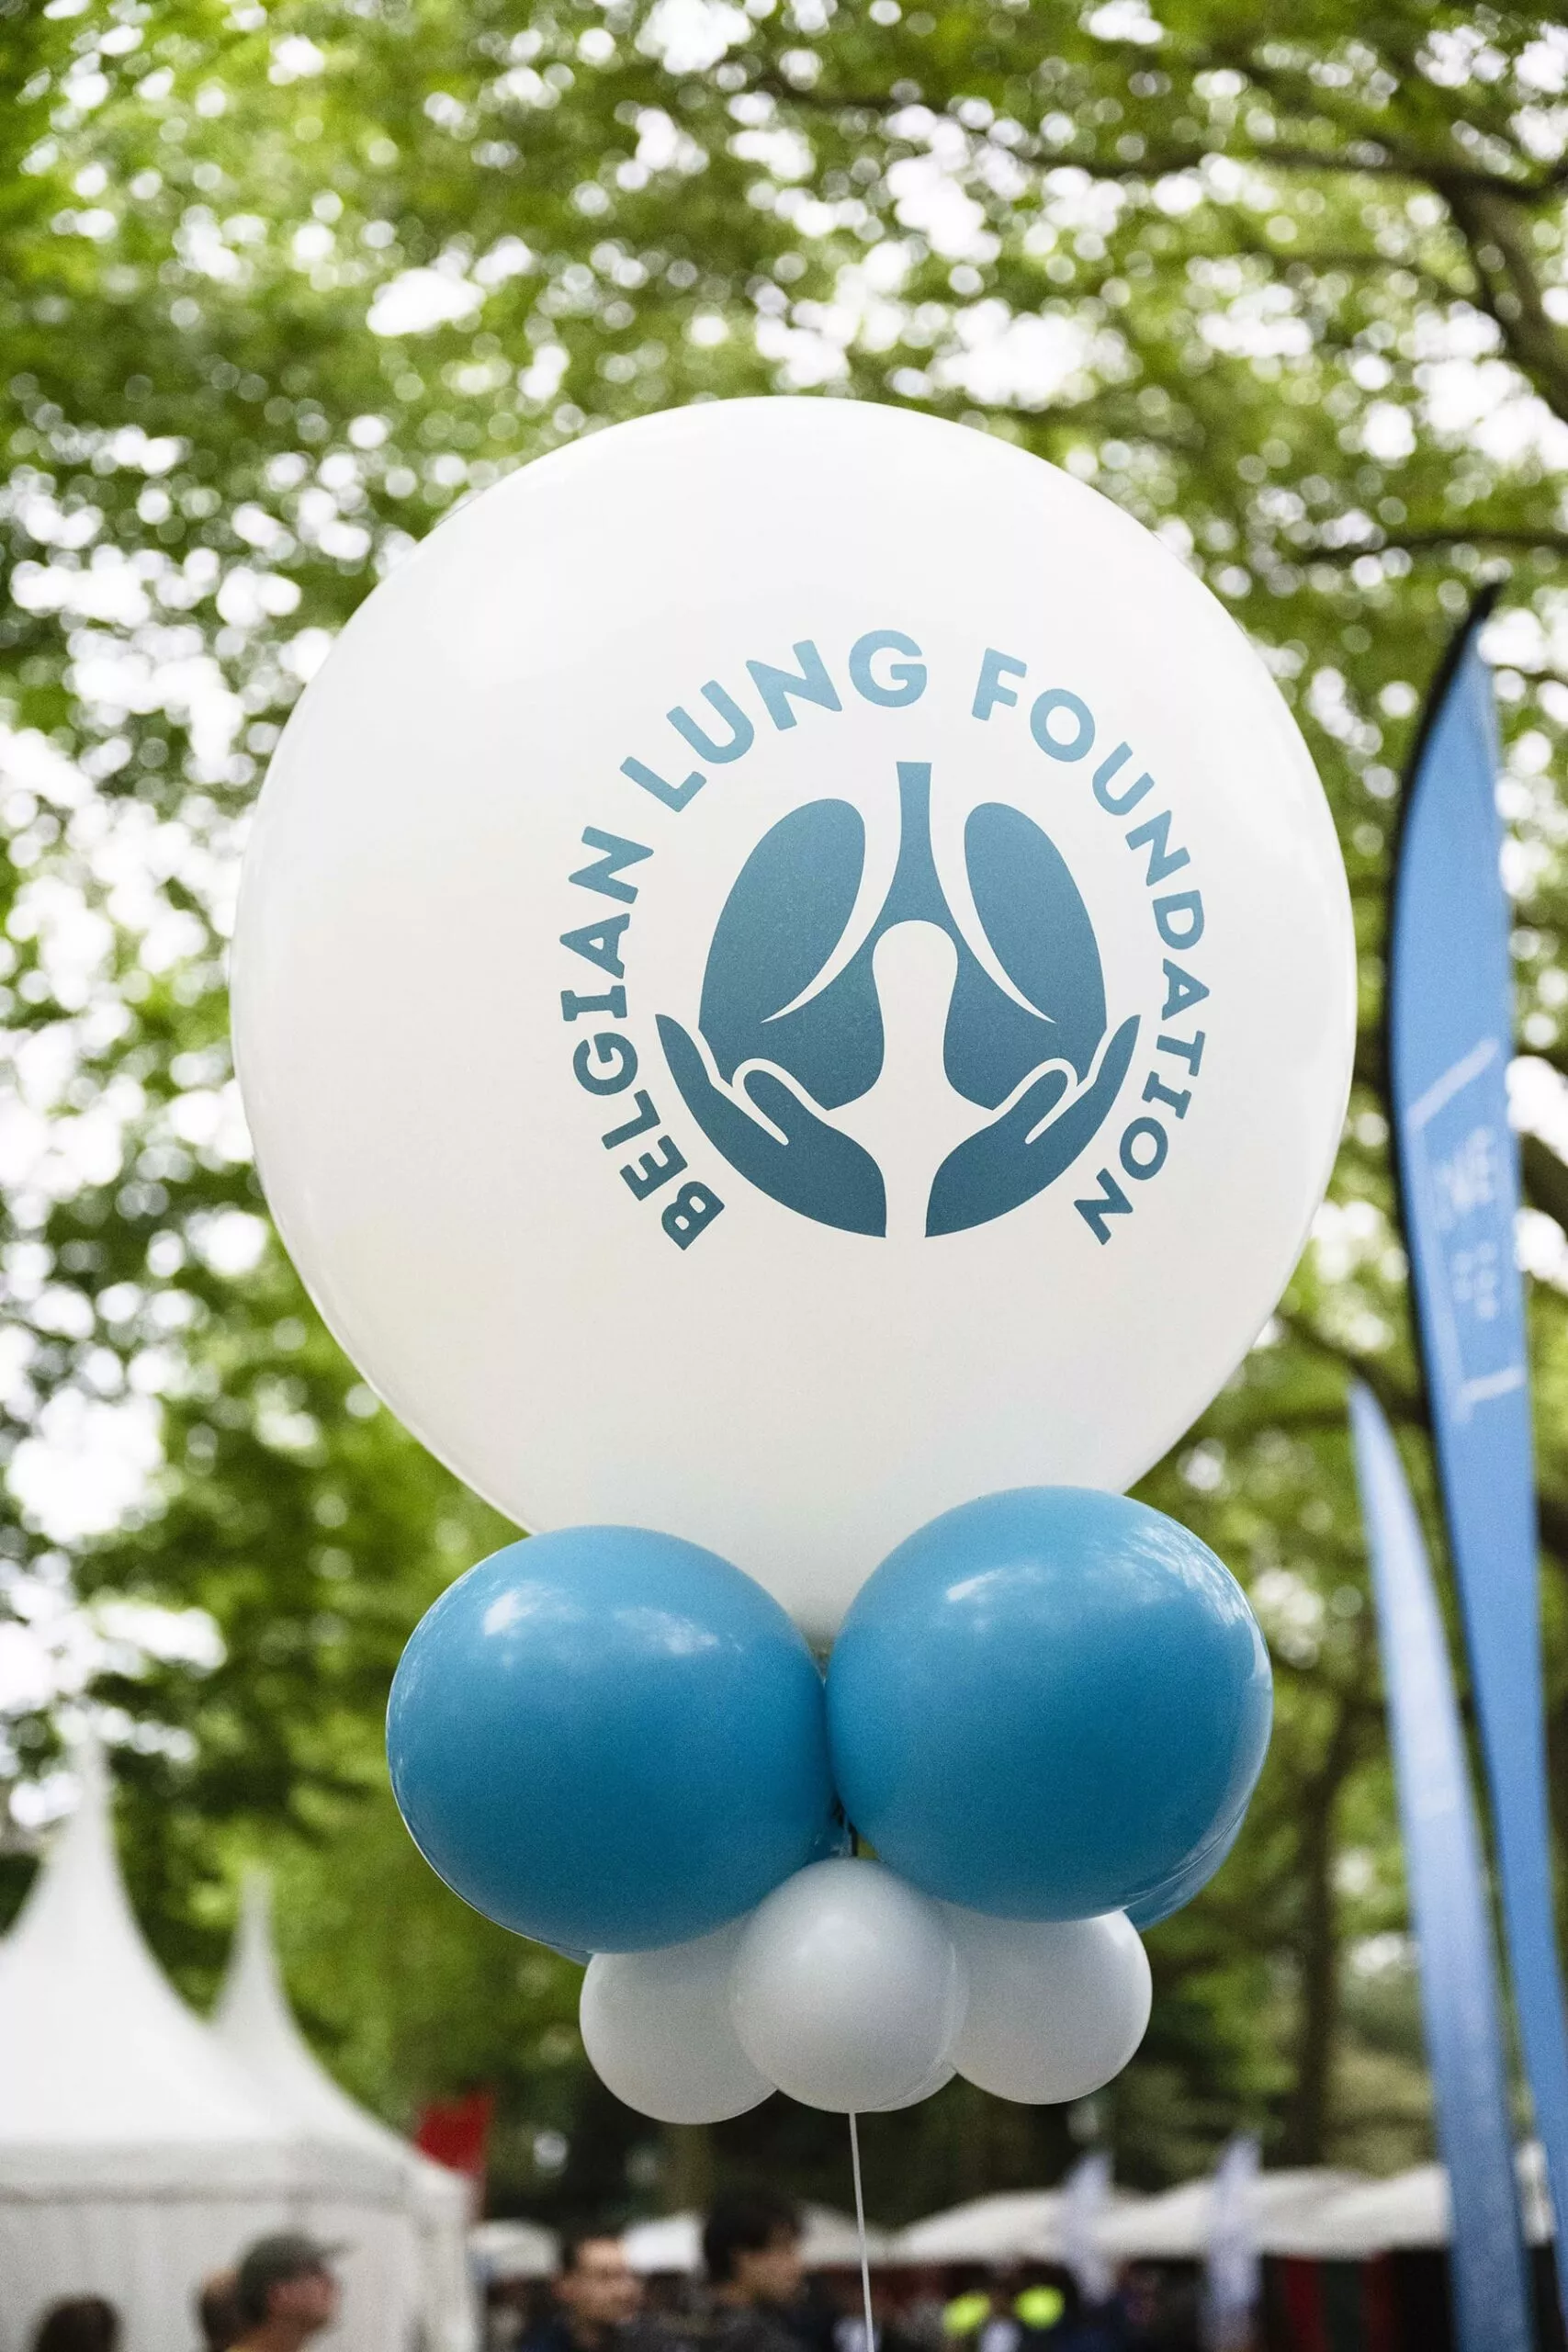 Belgian-lung-foundation-20km-stand